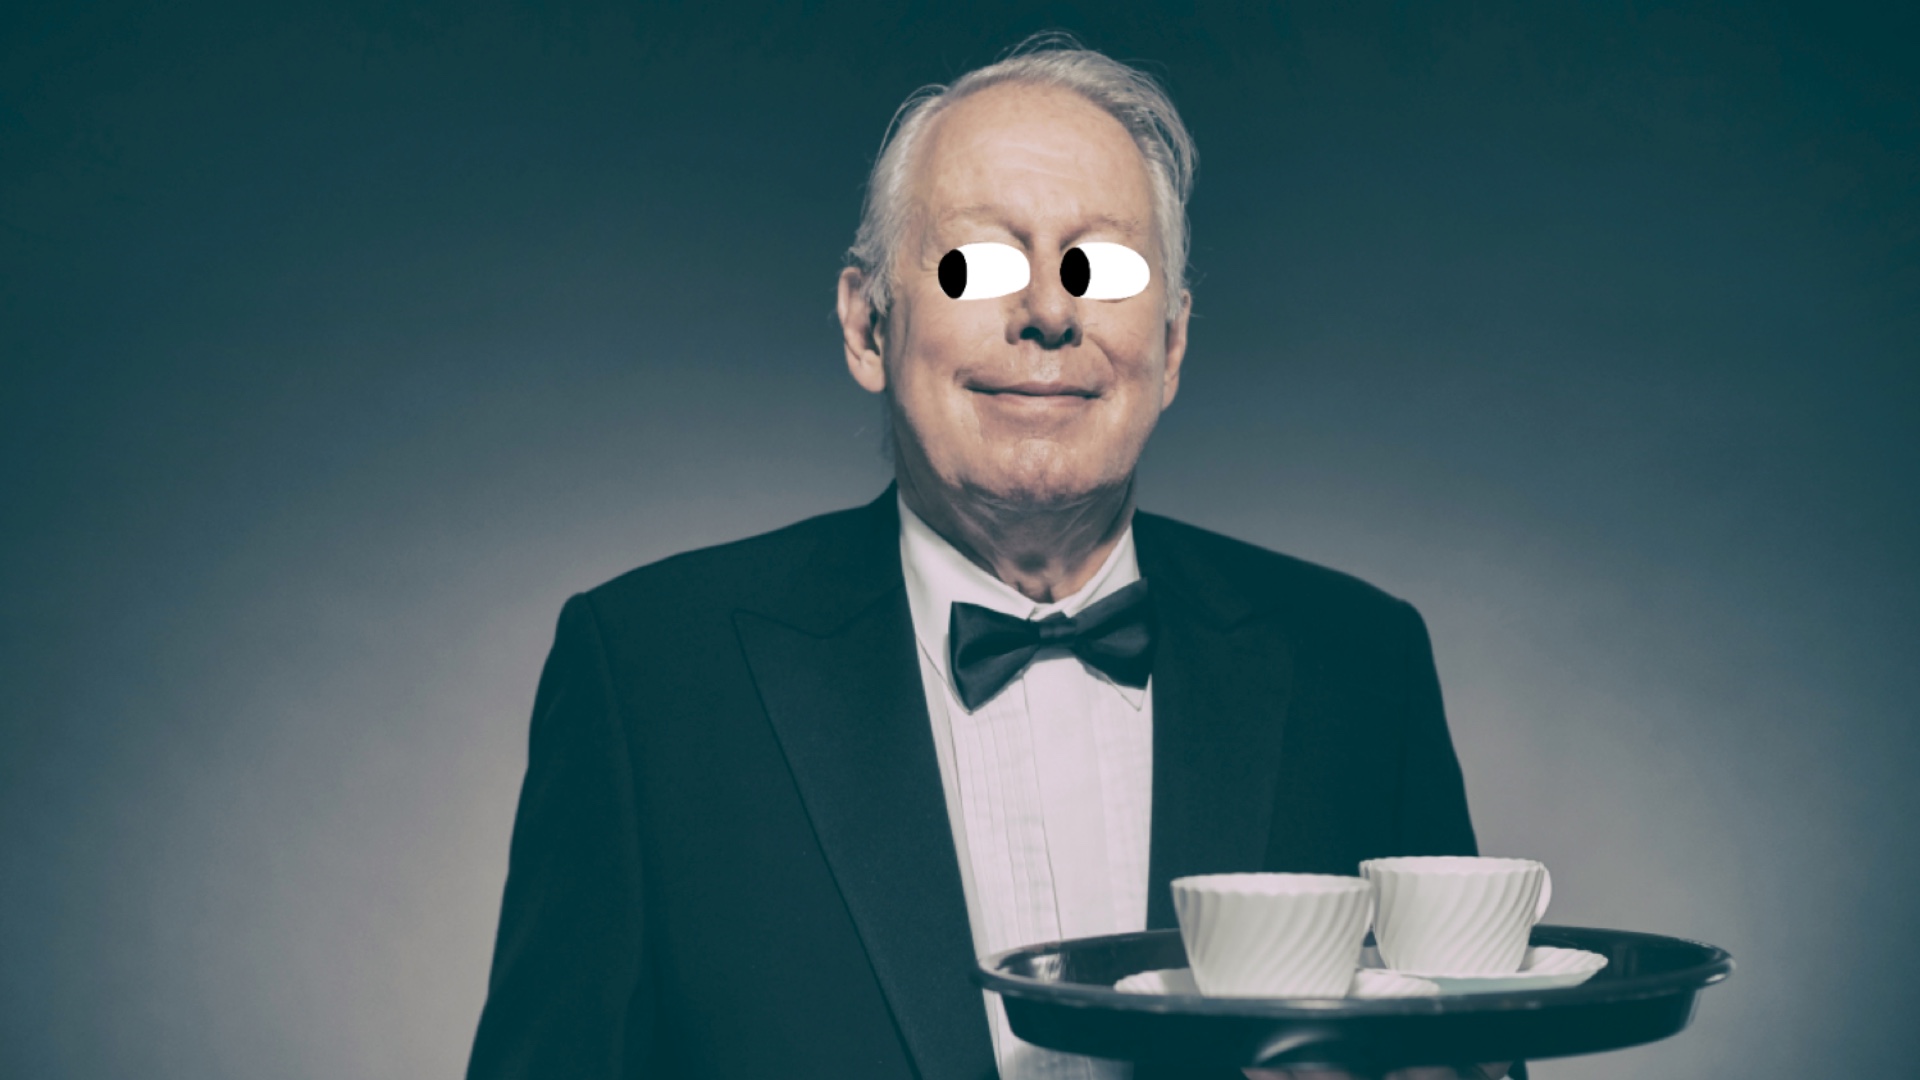 A butler holding a tray with cups and saucers on it